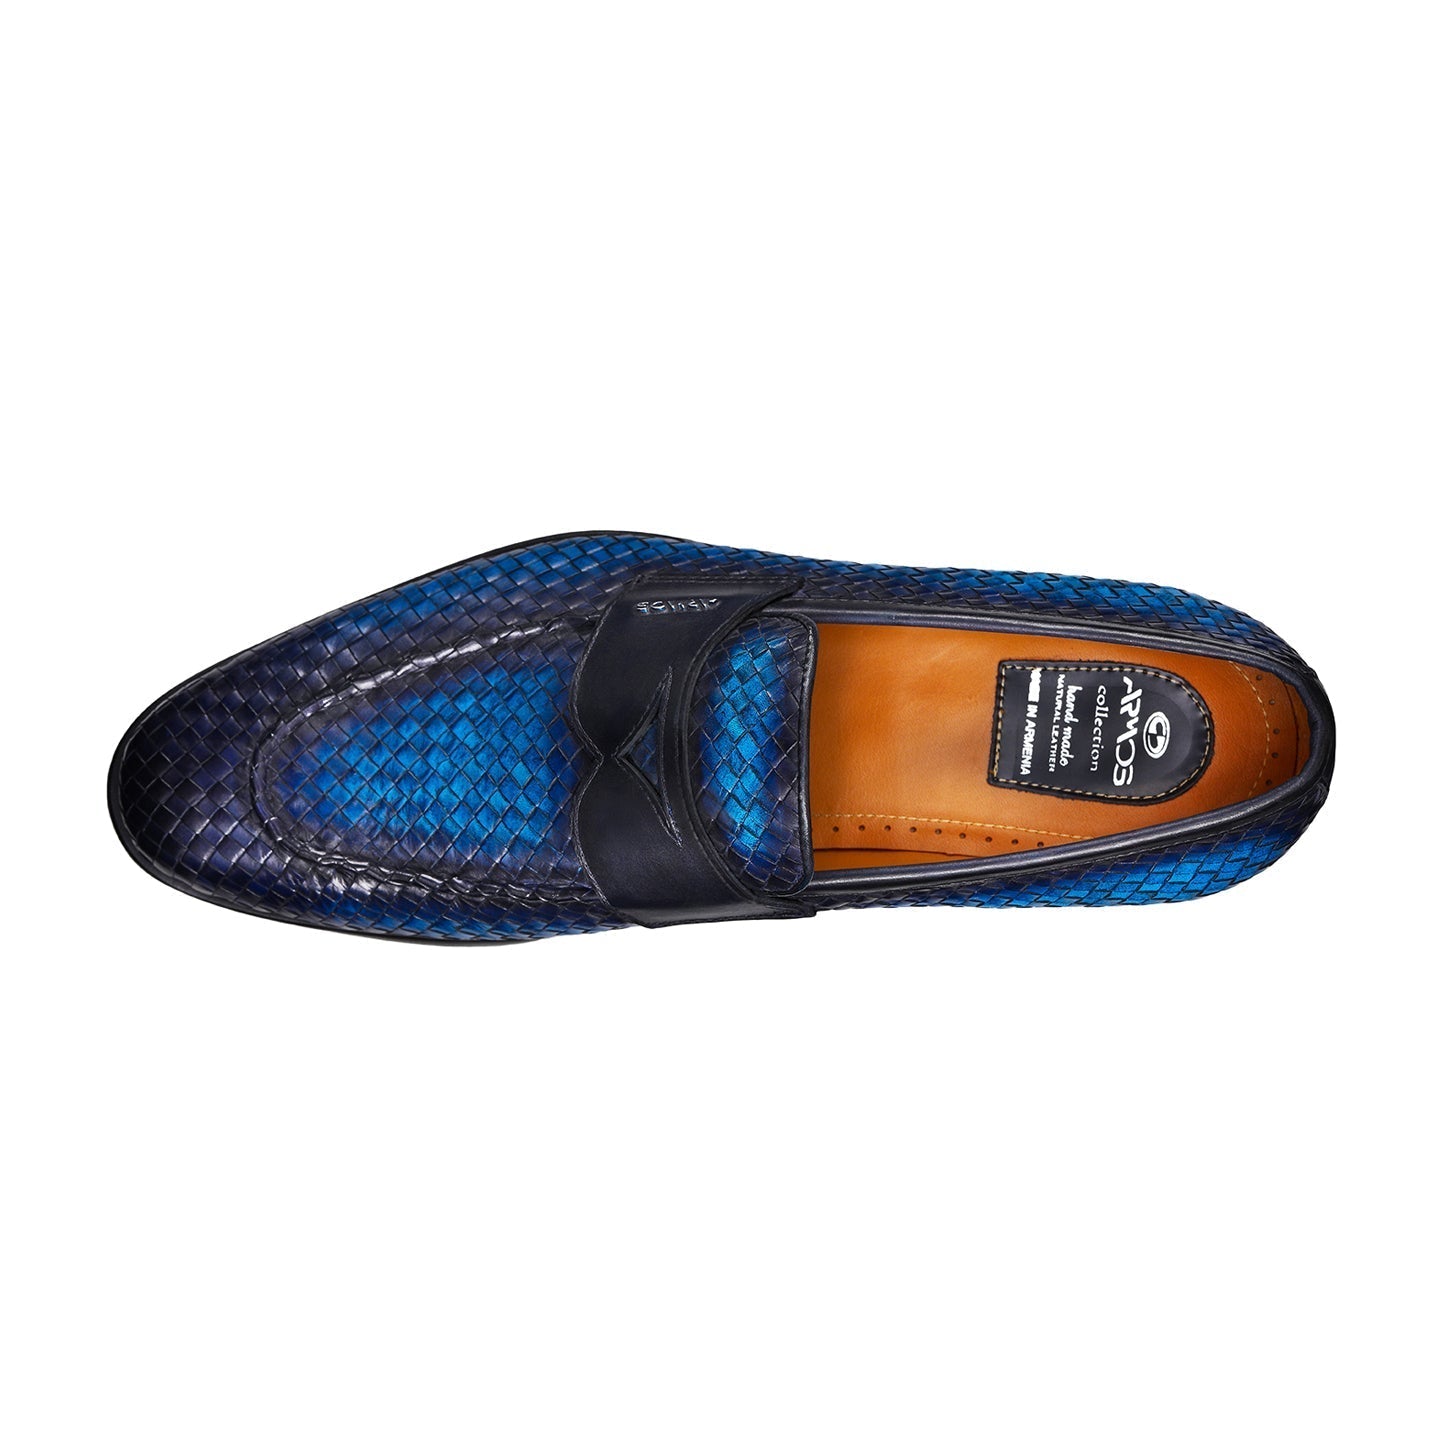 Woven shoes in blue shade